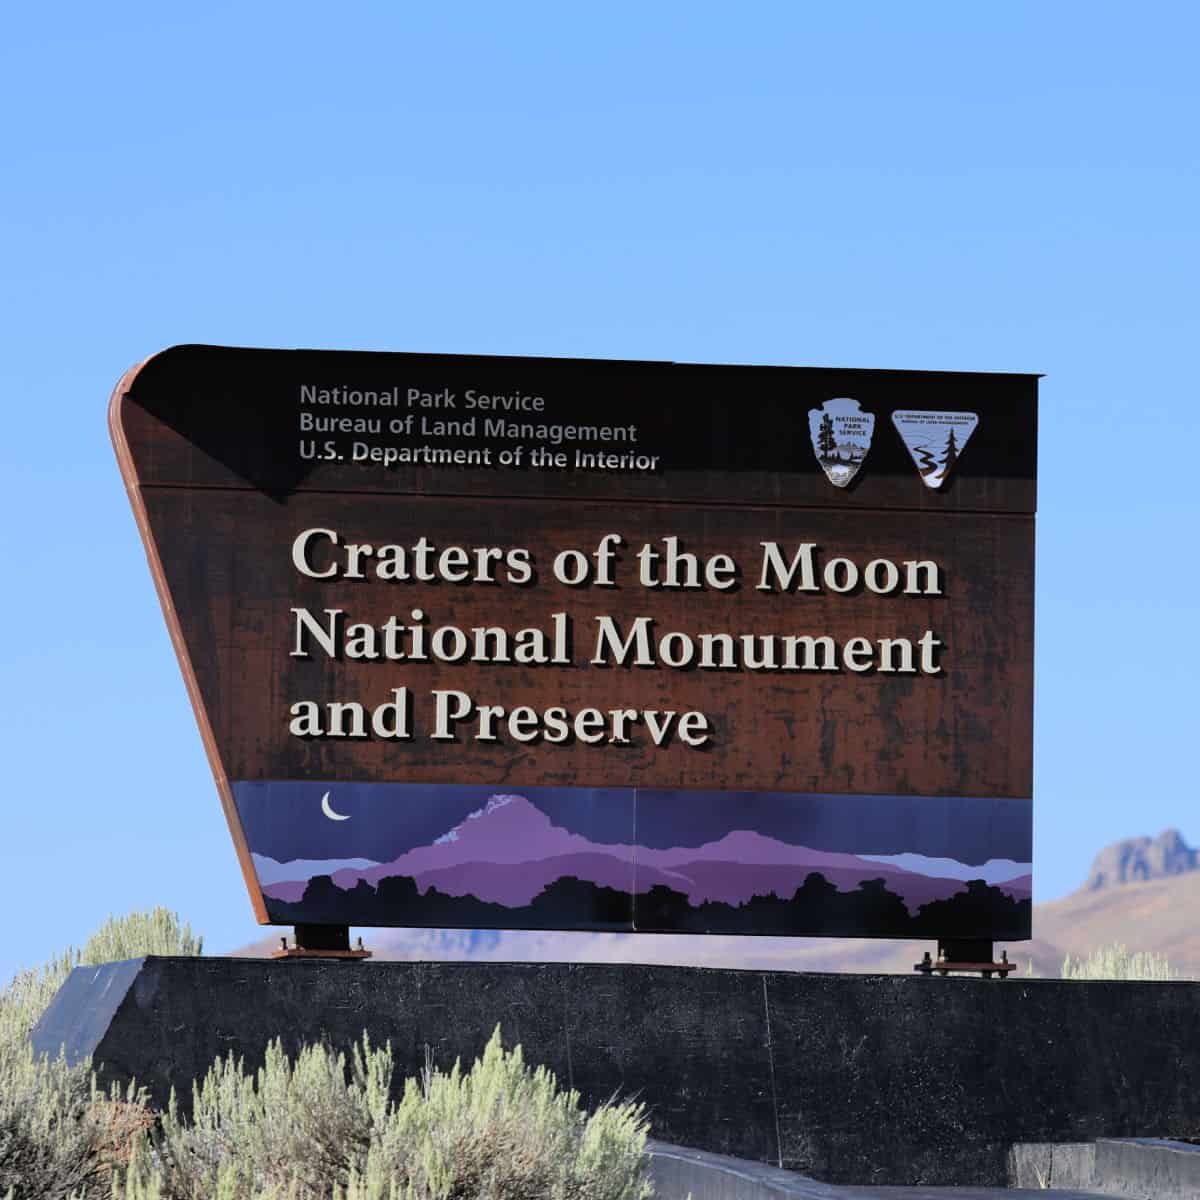 Craters of the Moon National Monument and Preserve entrance sign